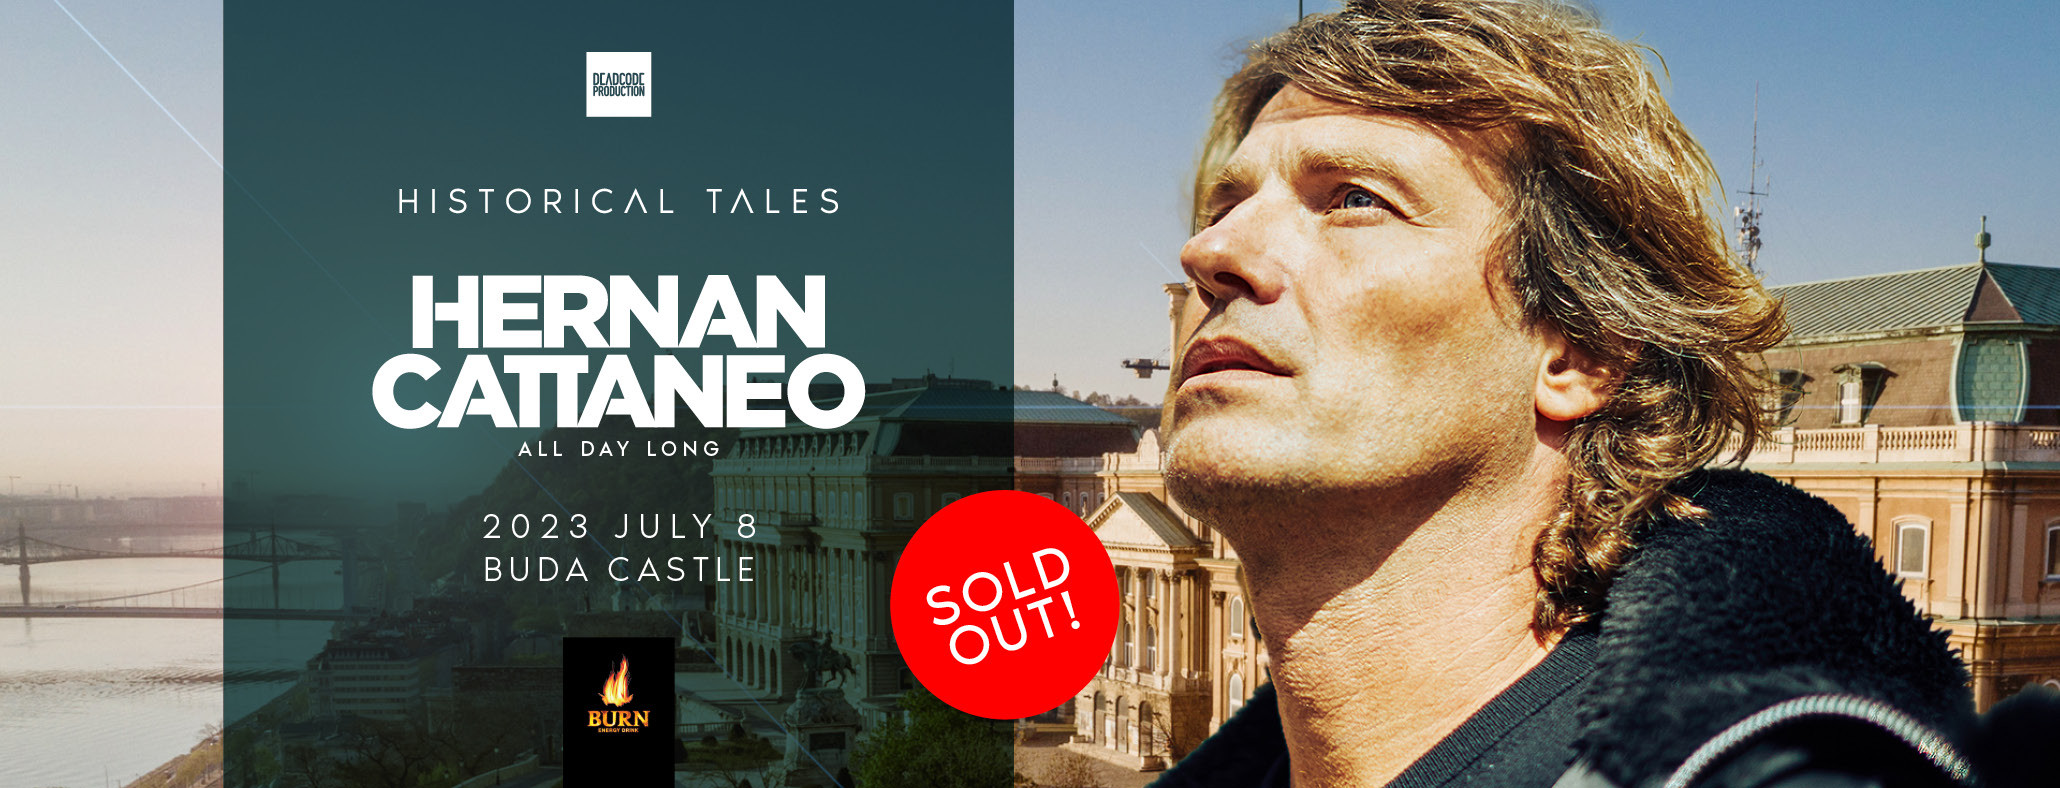 HISTORICAL TALES WITH HERNAN CATTANEO